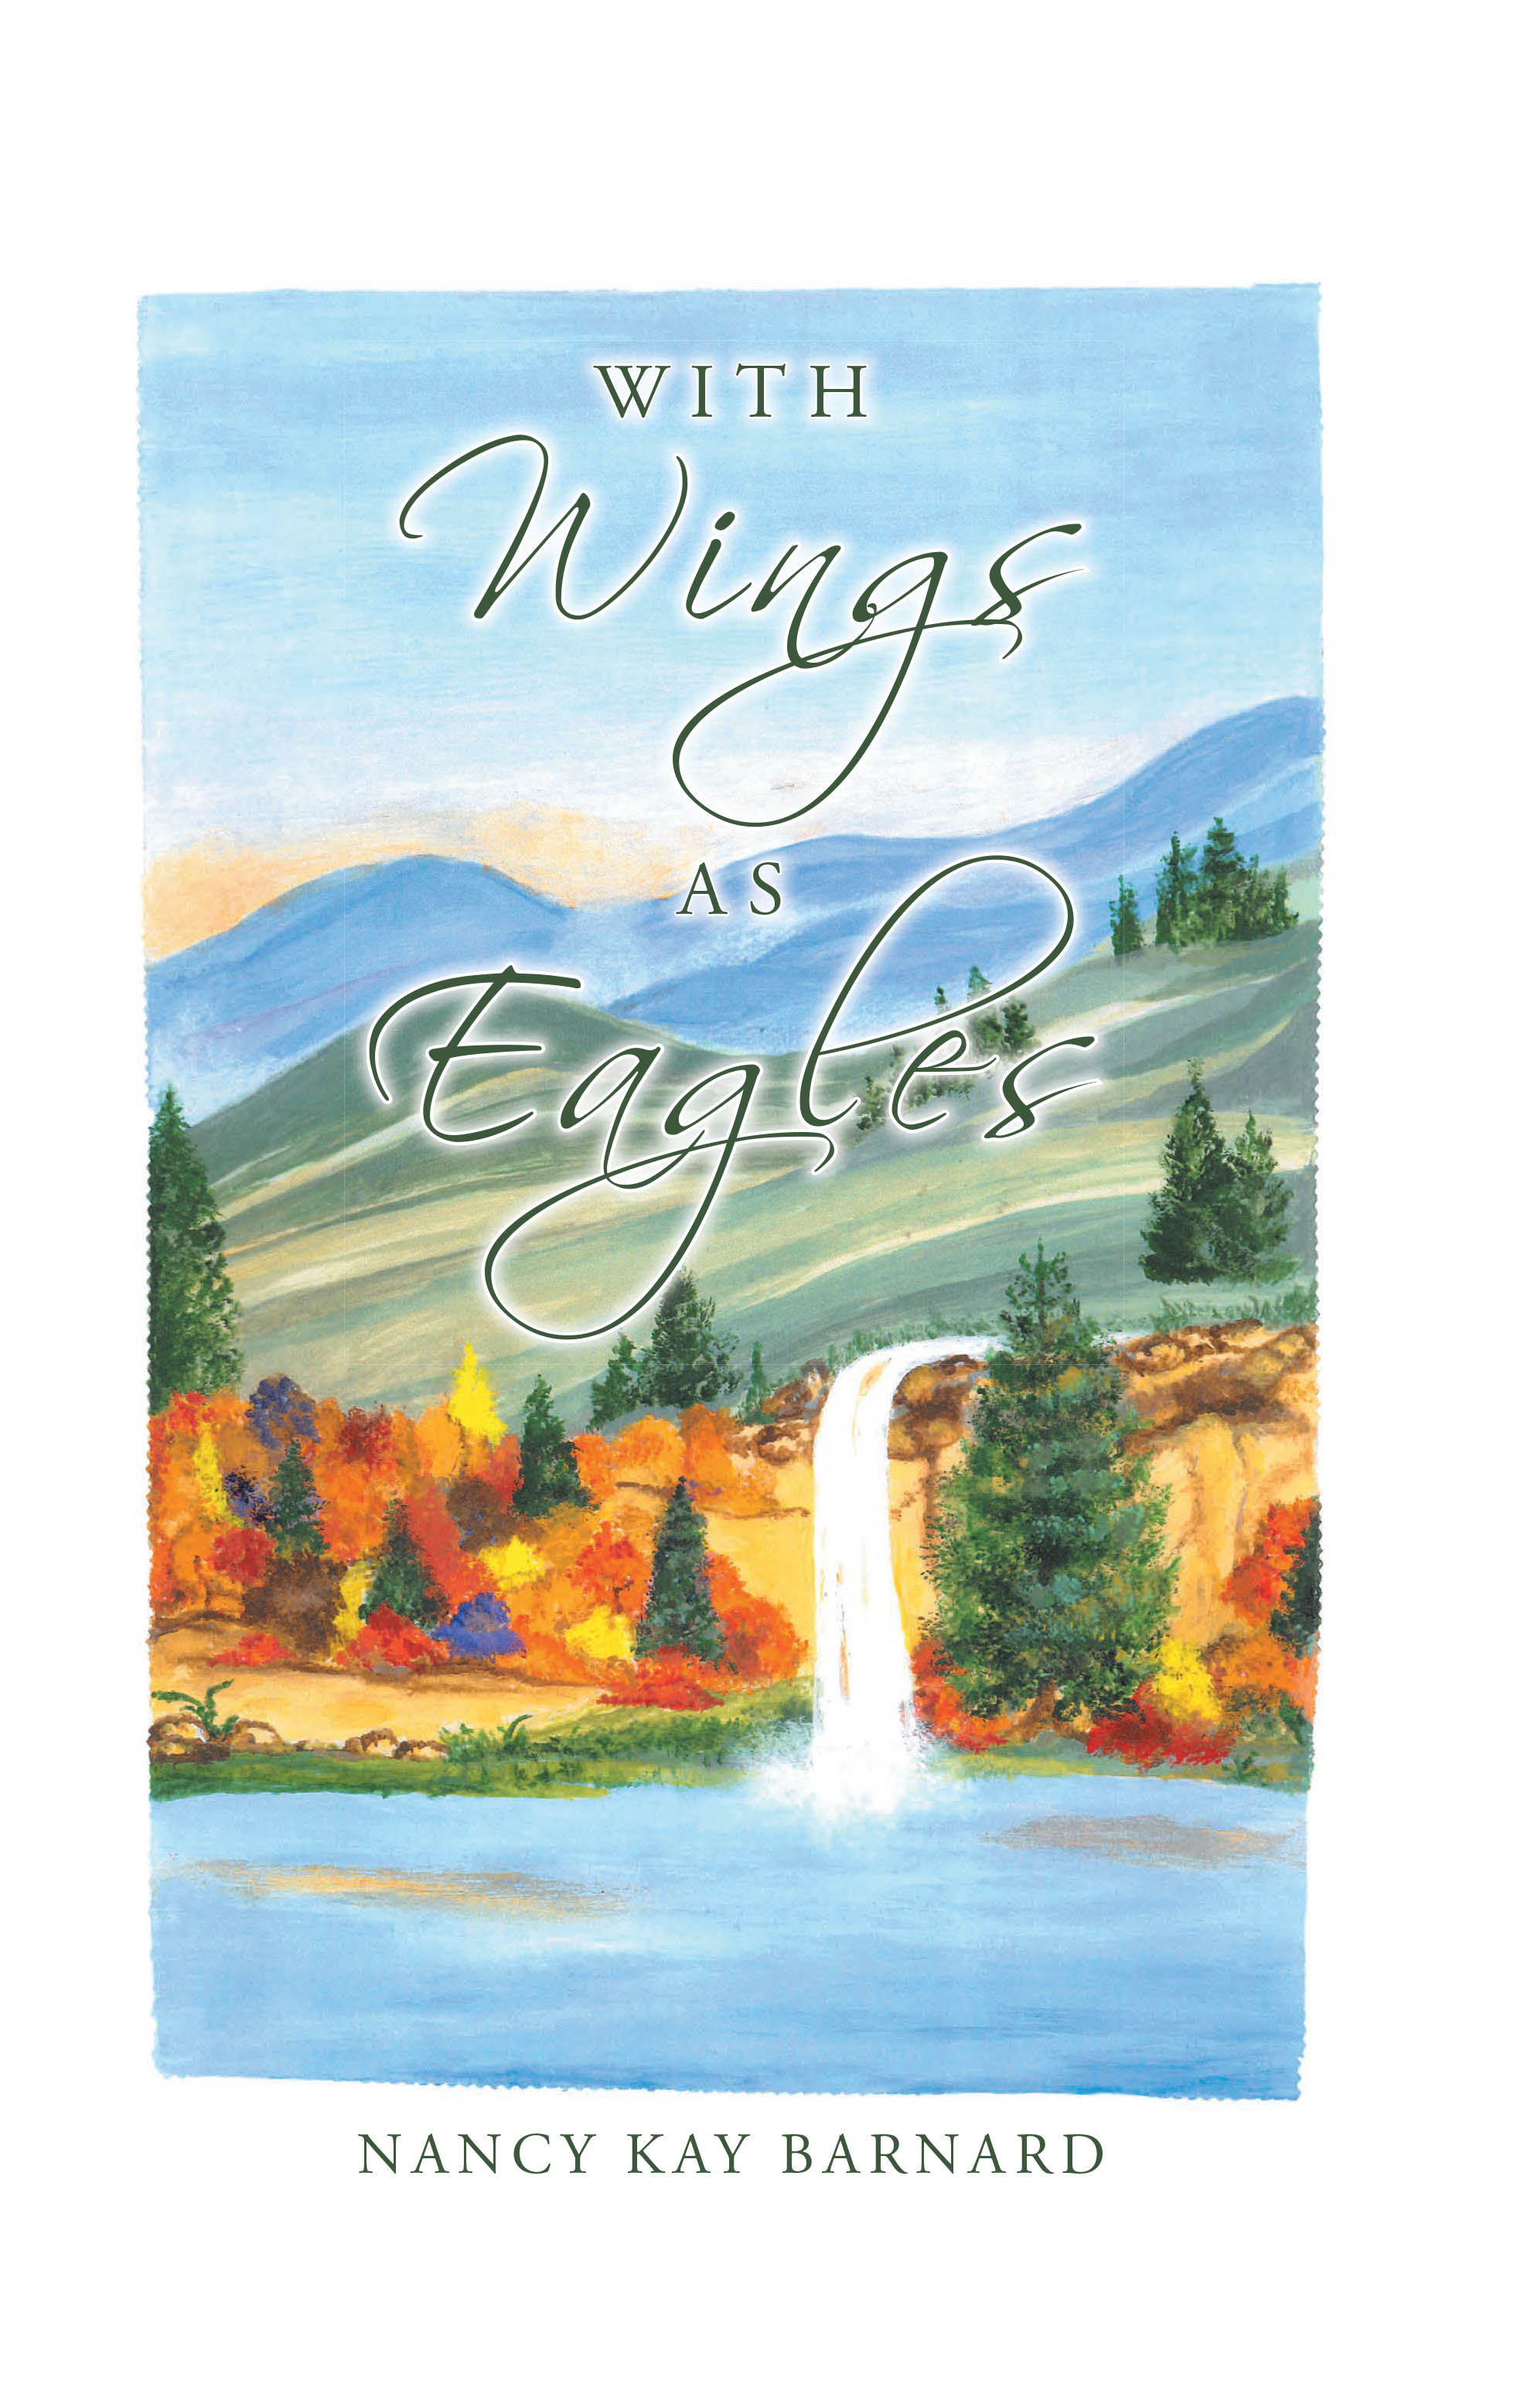 Nancy Kay Barnard’s Newly Released "With Wings as Eagles" is an Enjoyable Adventure in the Wilds of 1856 Kentucky